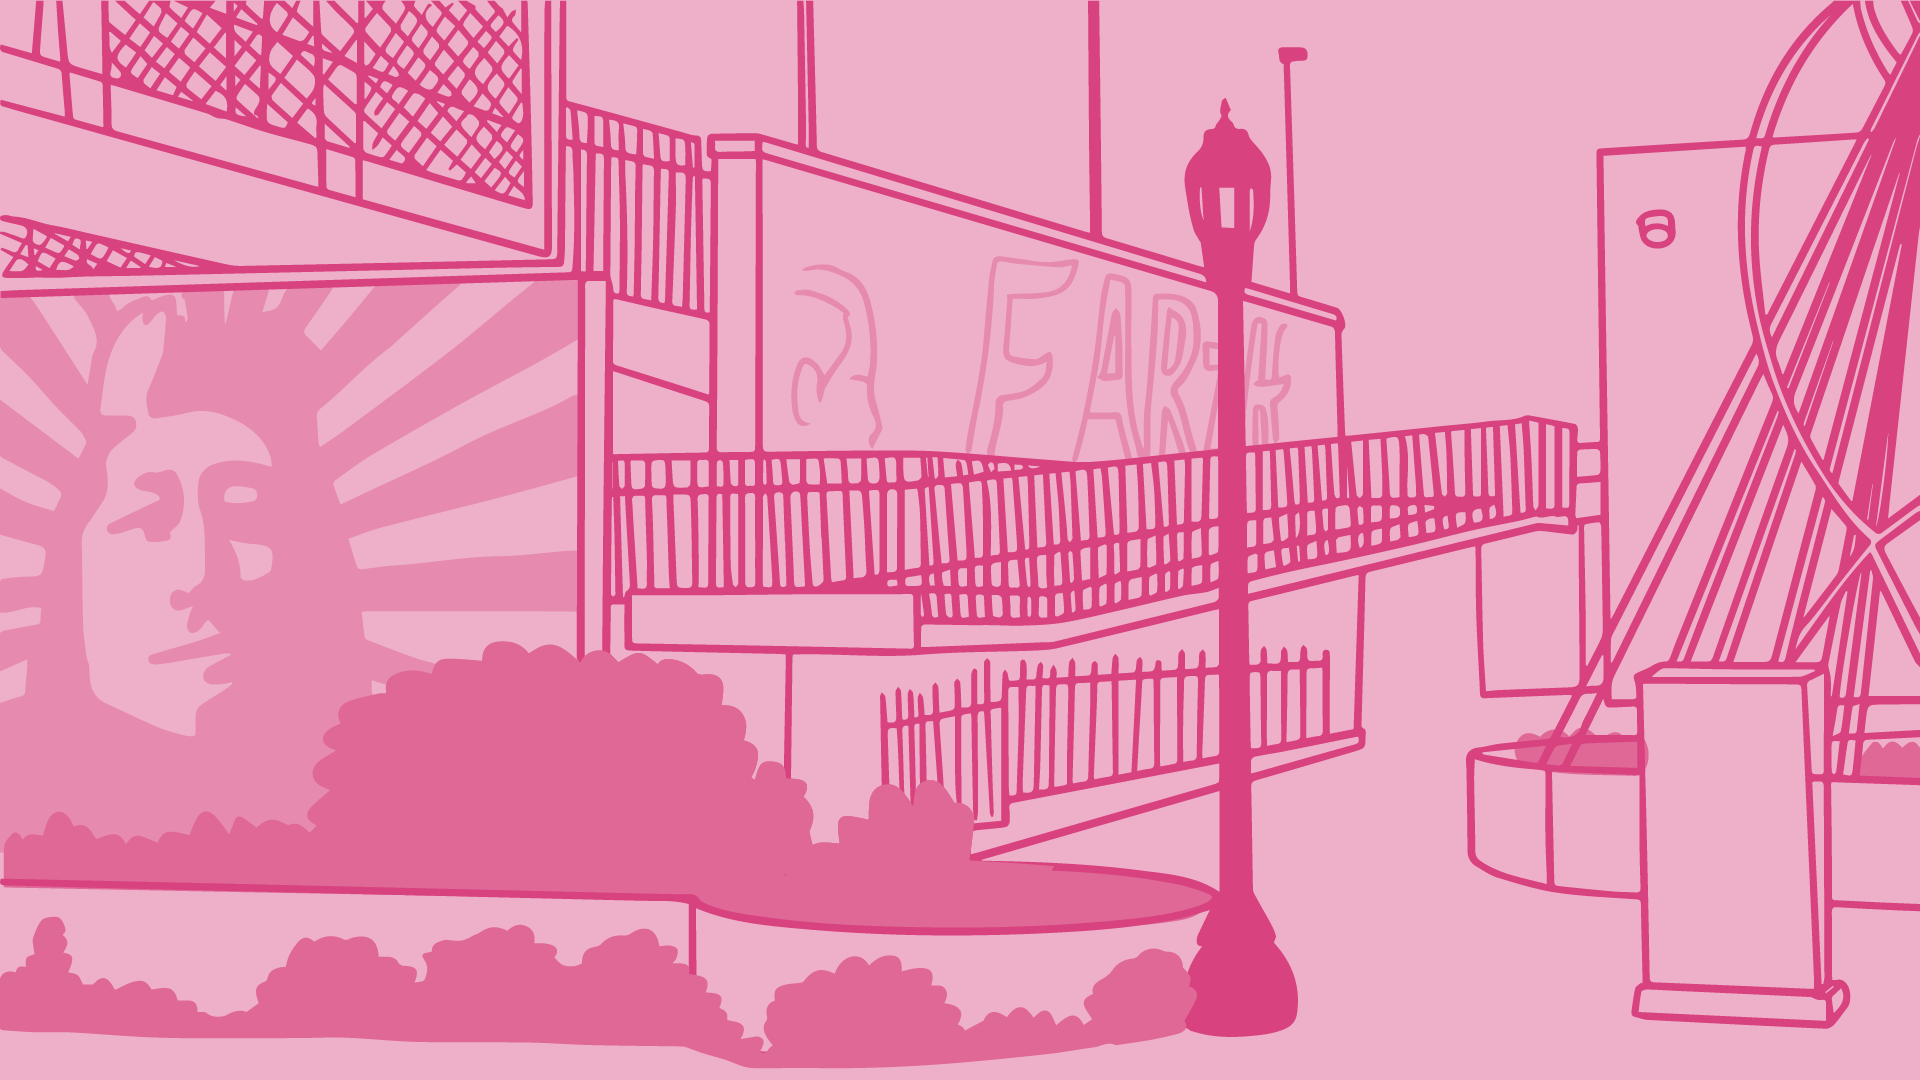 An illustration of a park mural in monochromatic pink